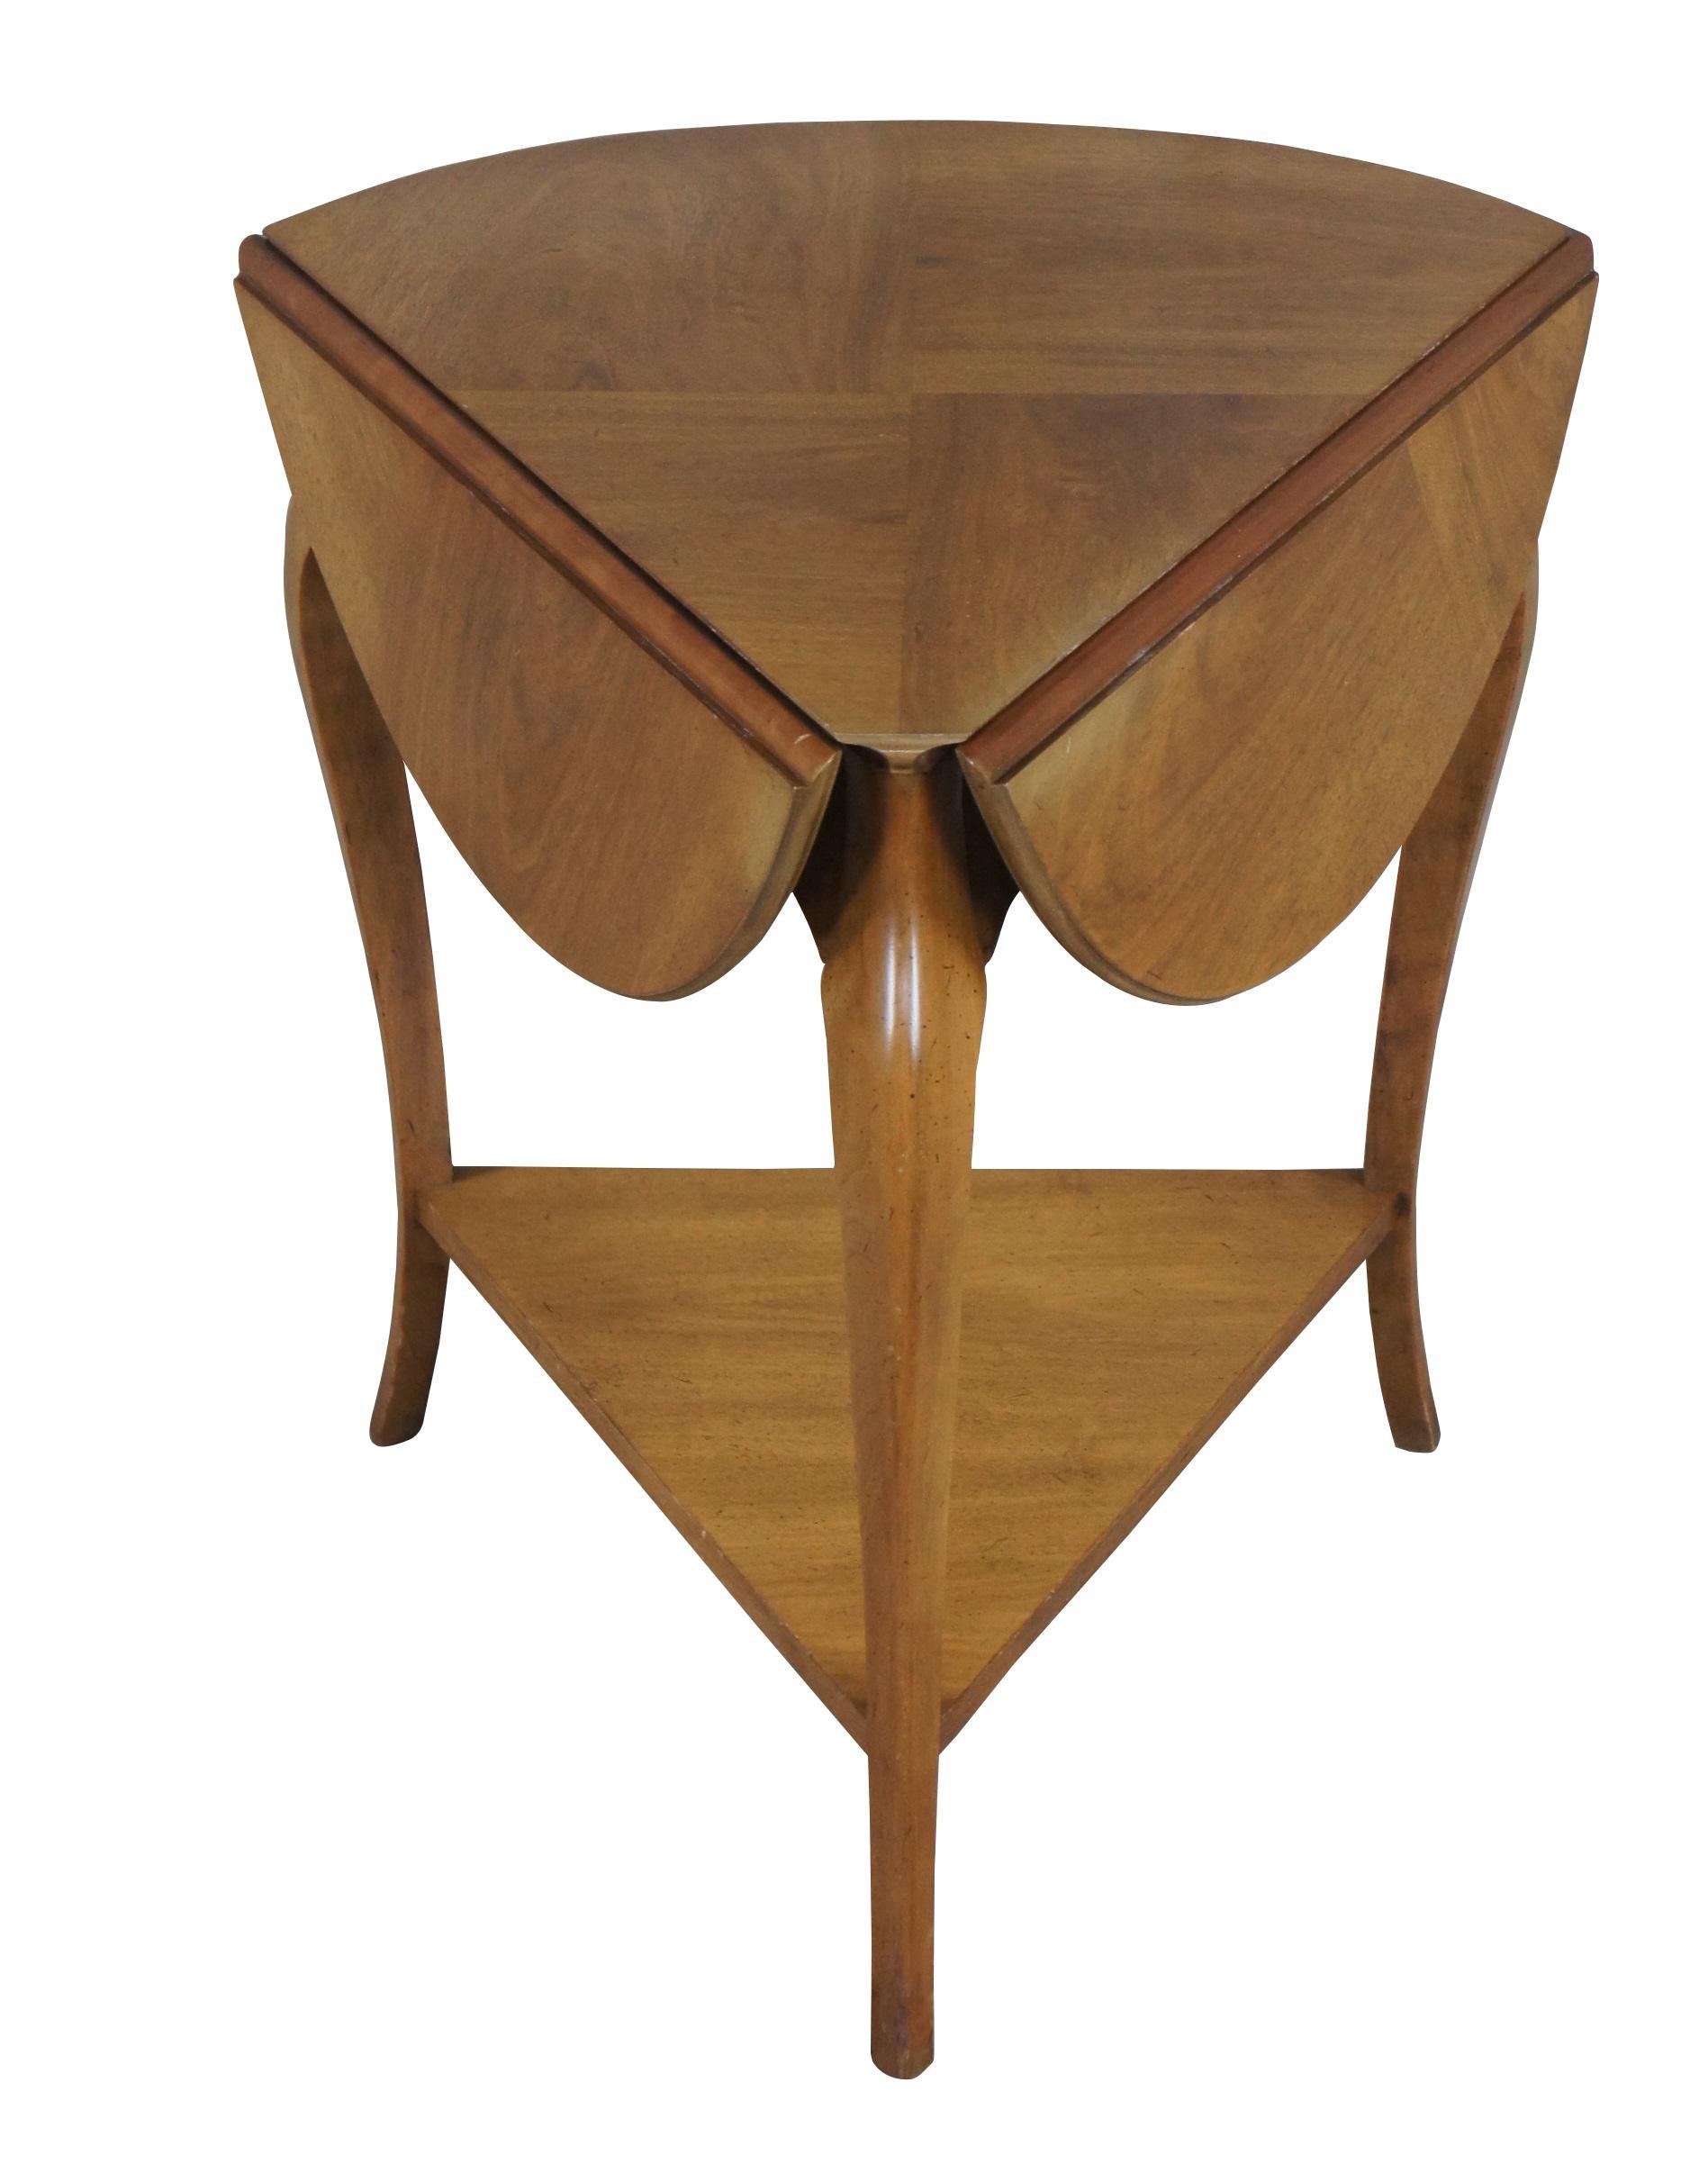 Vintage John Widdicomb handkerchief accent table, circa 1960s.  Made of walnut featuring triangular form with two tiered drop leaf design, matchbook top and cabriole legs.  

John Widdicomb
AMERICAN, 1845-1910
In the Widdicomb family, furniture ran